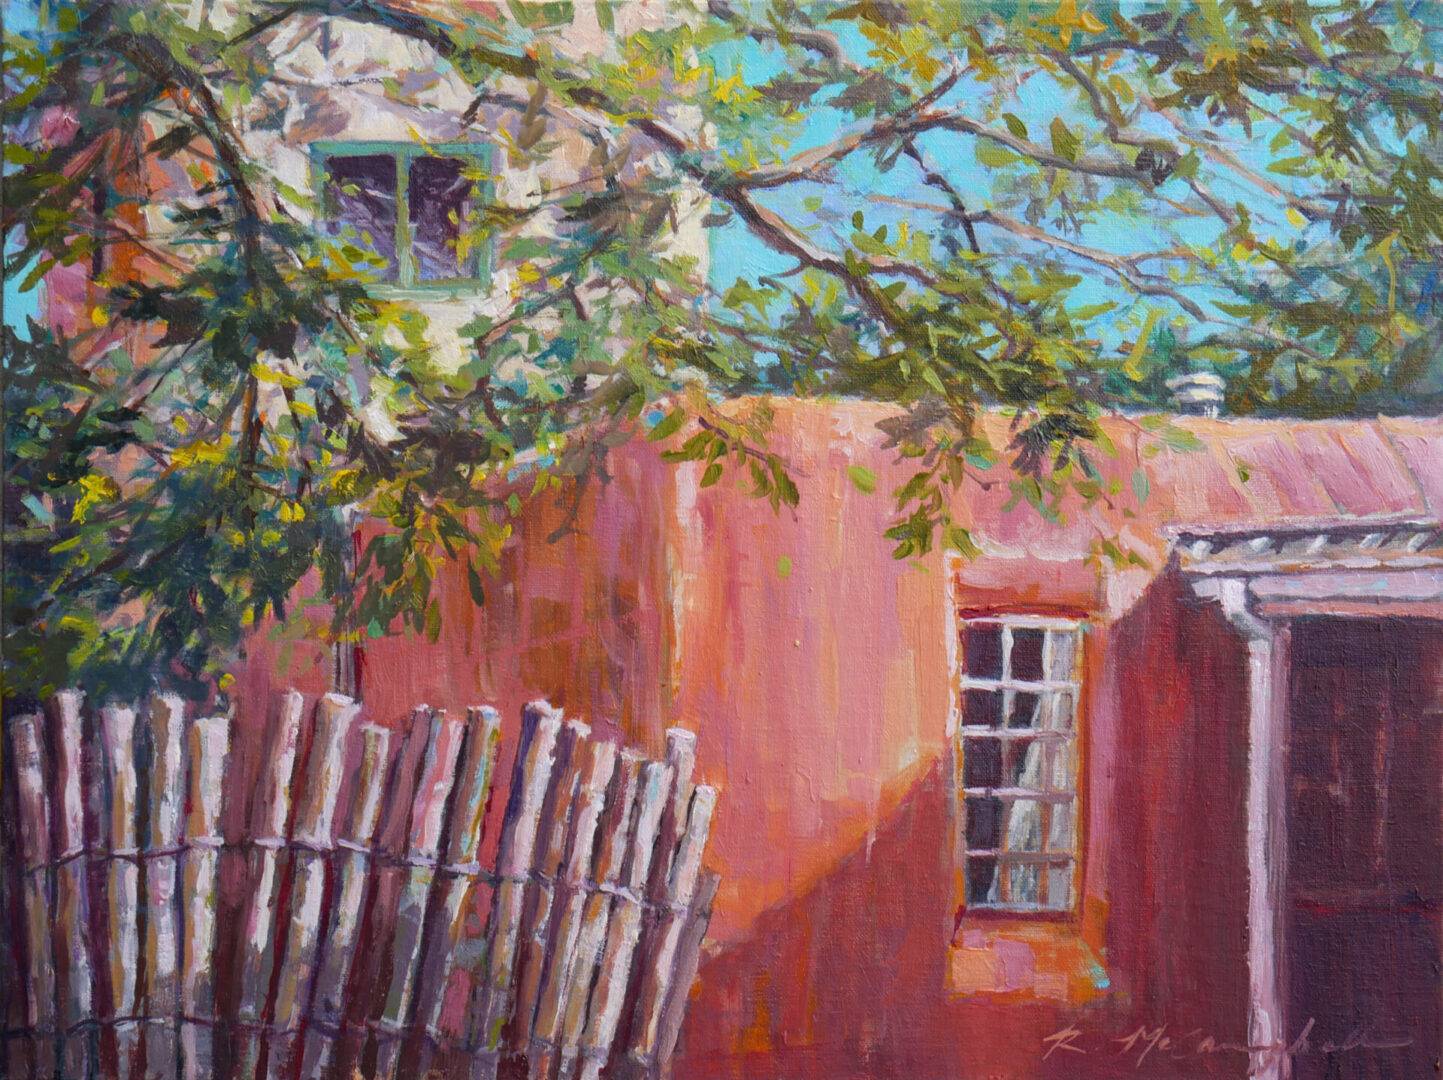 A painting of red walls